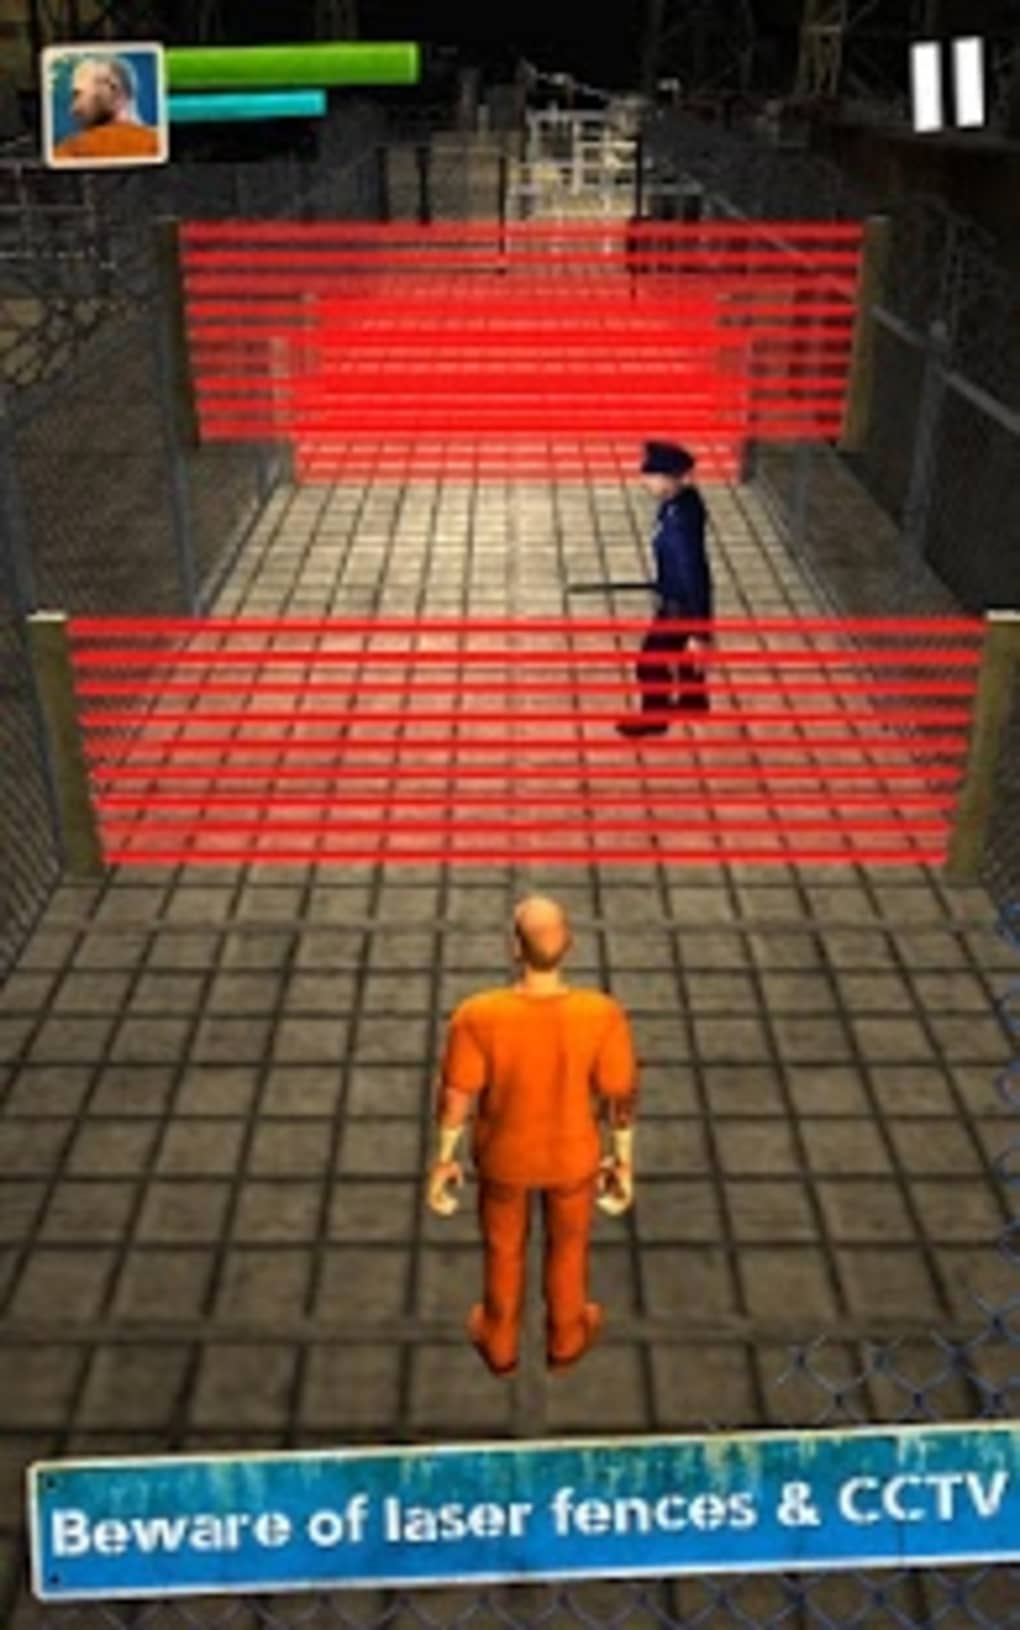 Prison Escape - try the uncharted adventure game APK for Android - Download